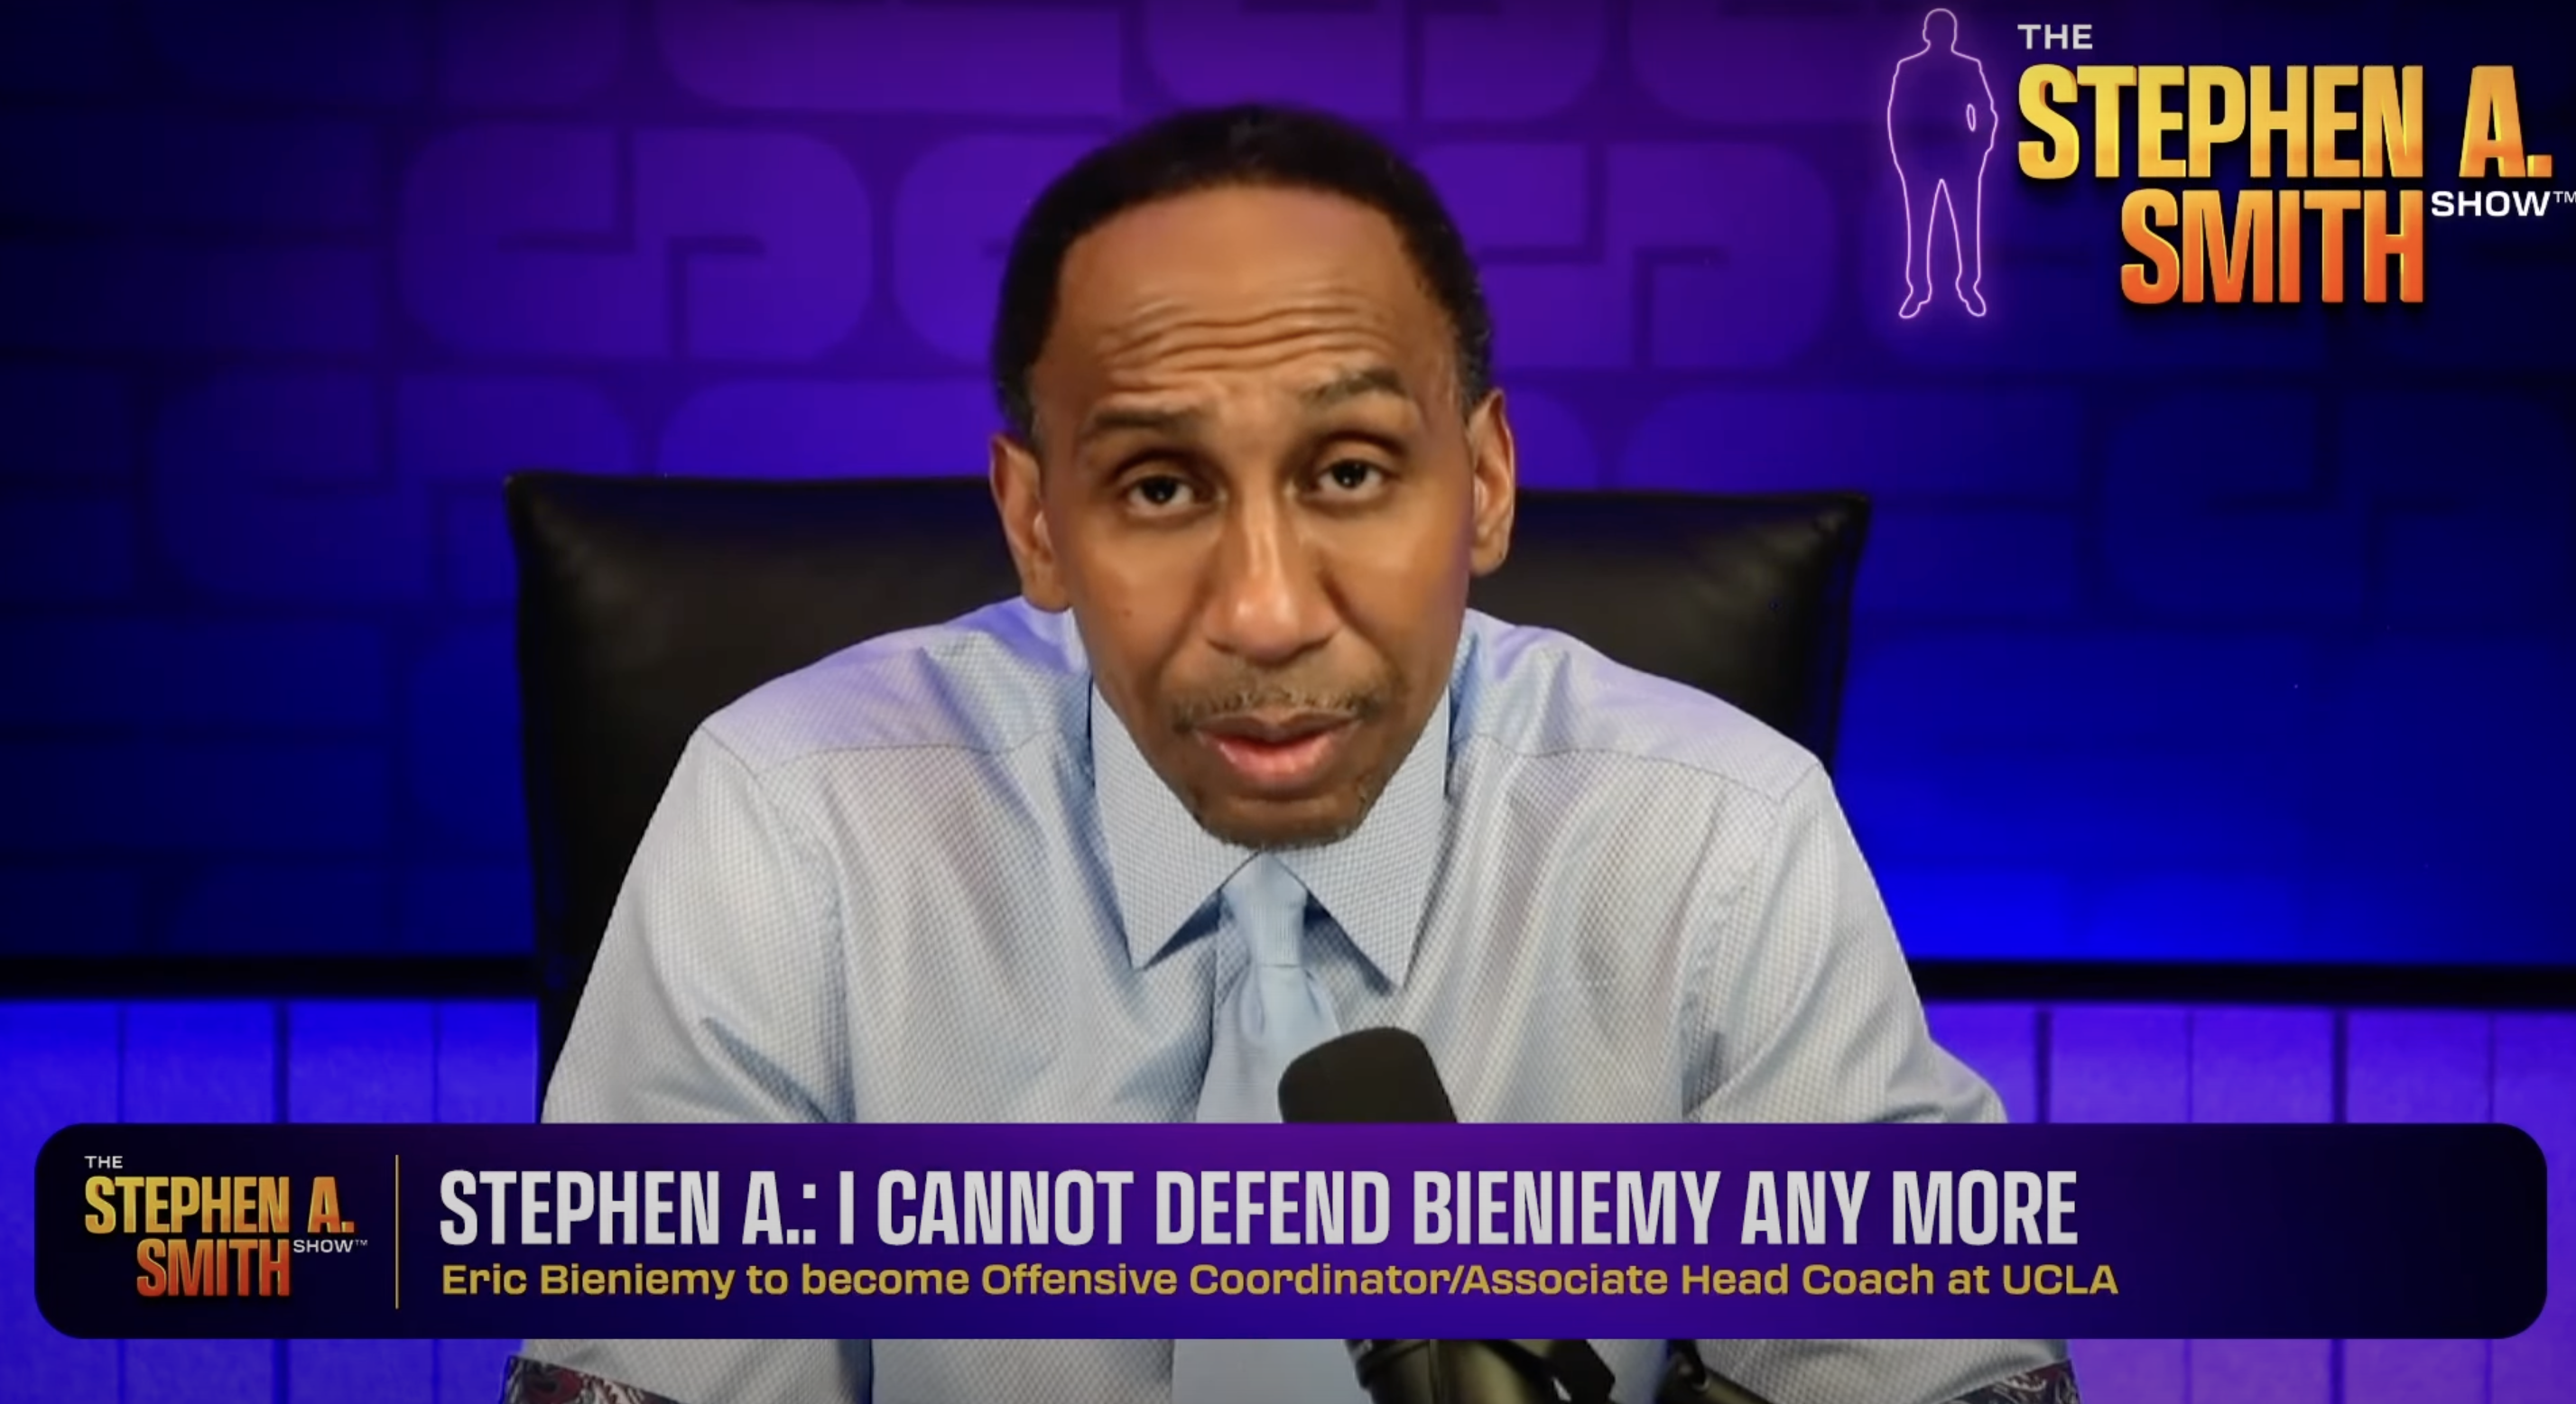 Stephen A. Smith discussing Eric Bieniemy taking UCLA offensive coordinator job.